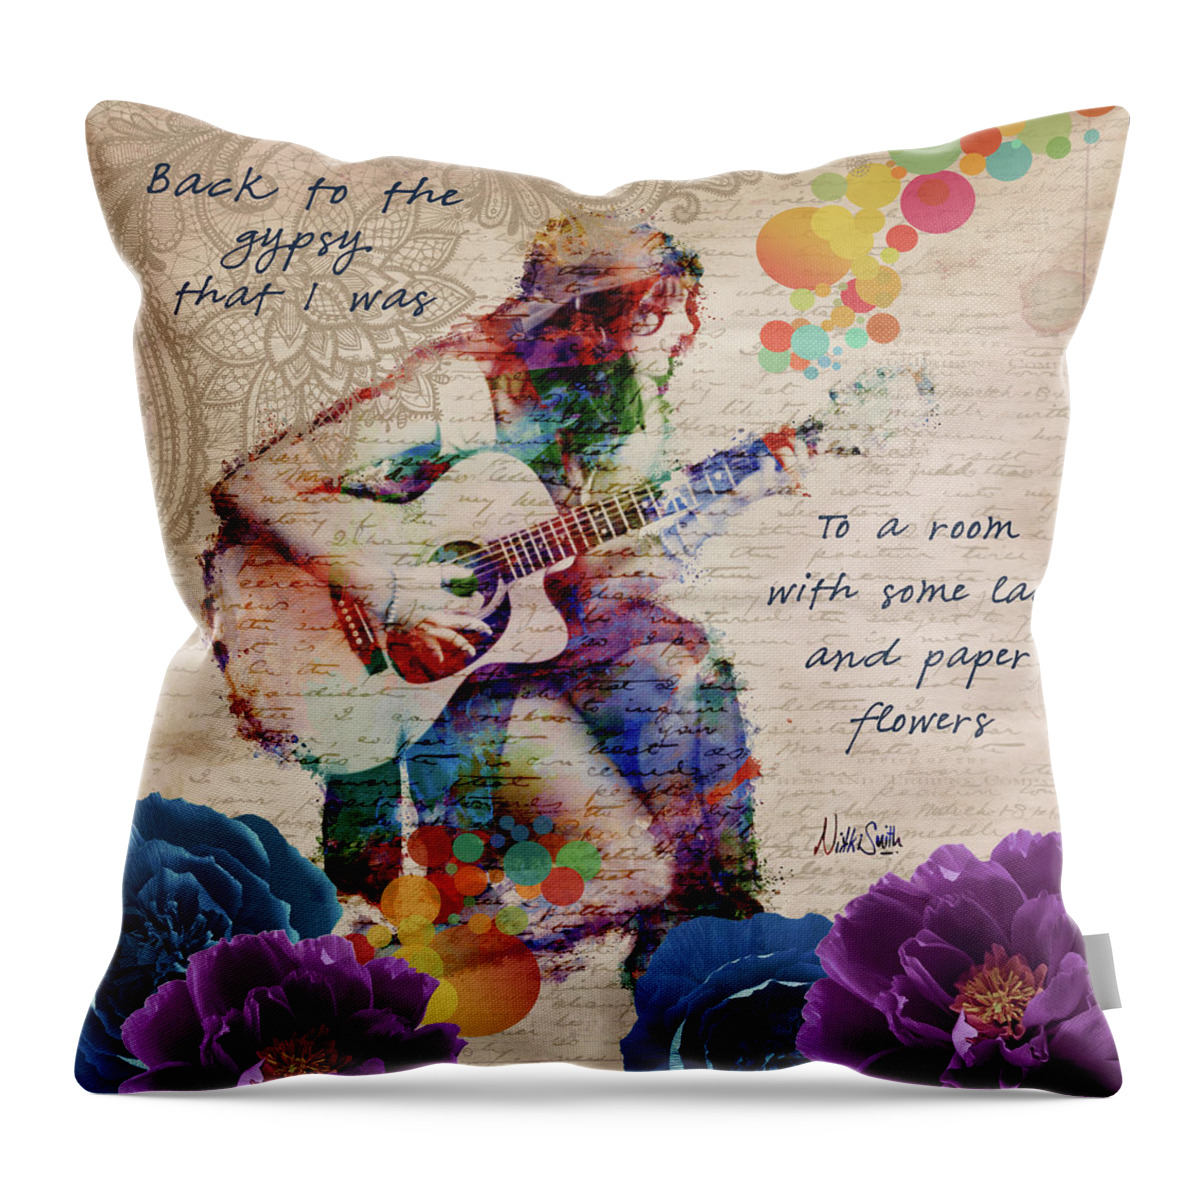 Gypsy Throw Pillow featuring the digital art Lace and Paper Flowers Square by Nikki Marie Smith